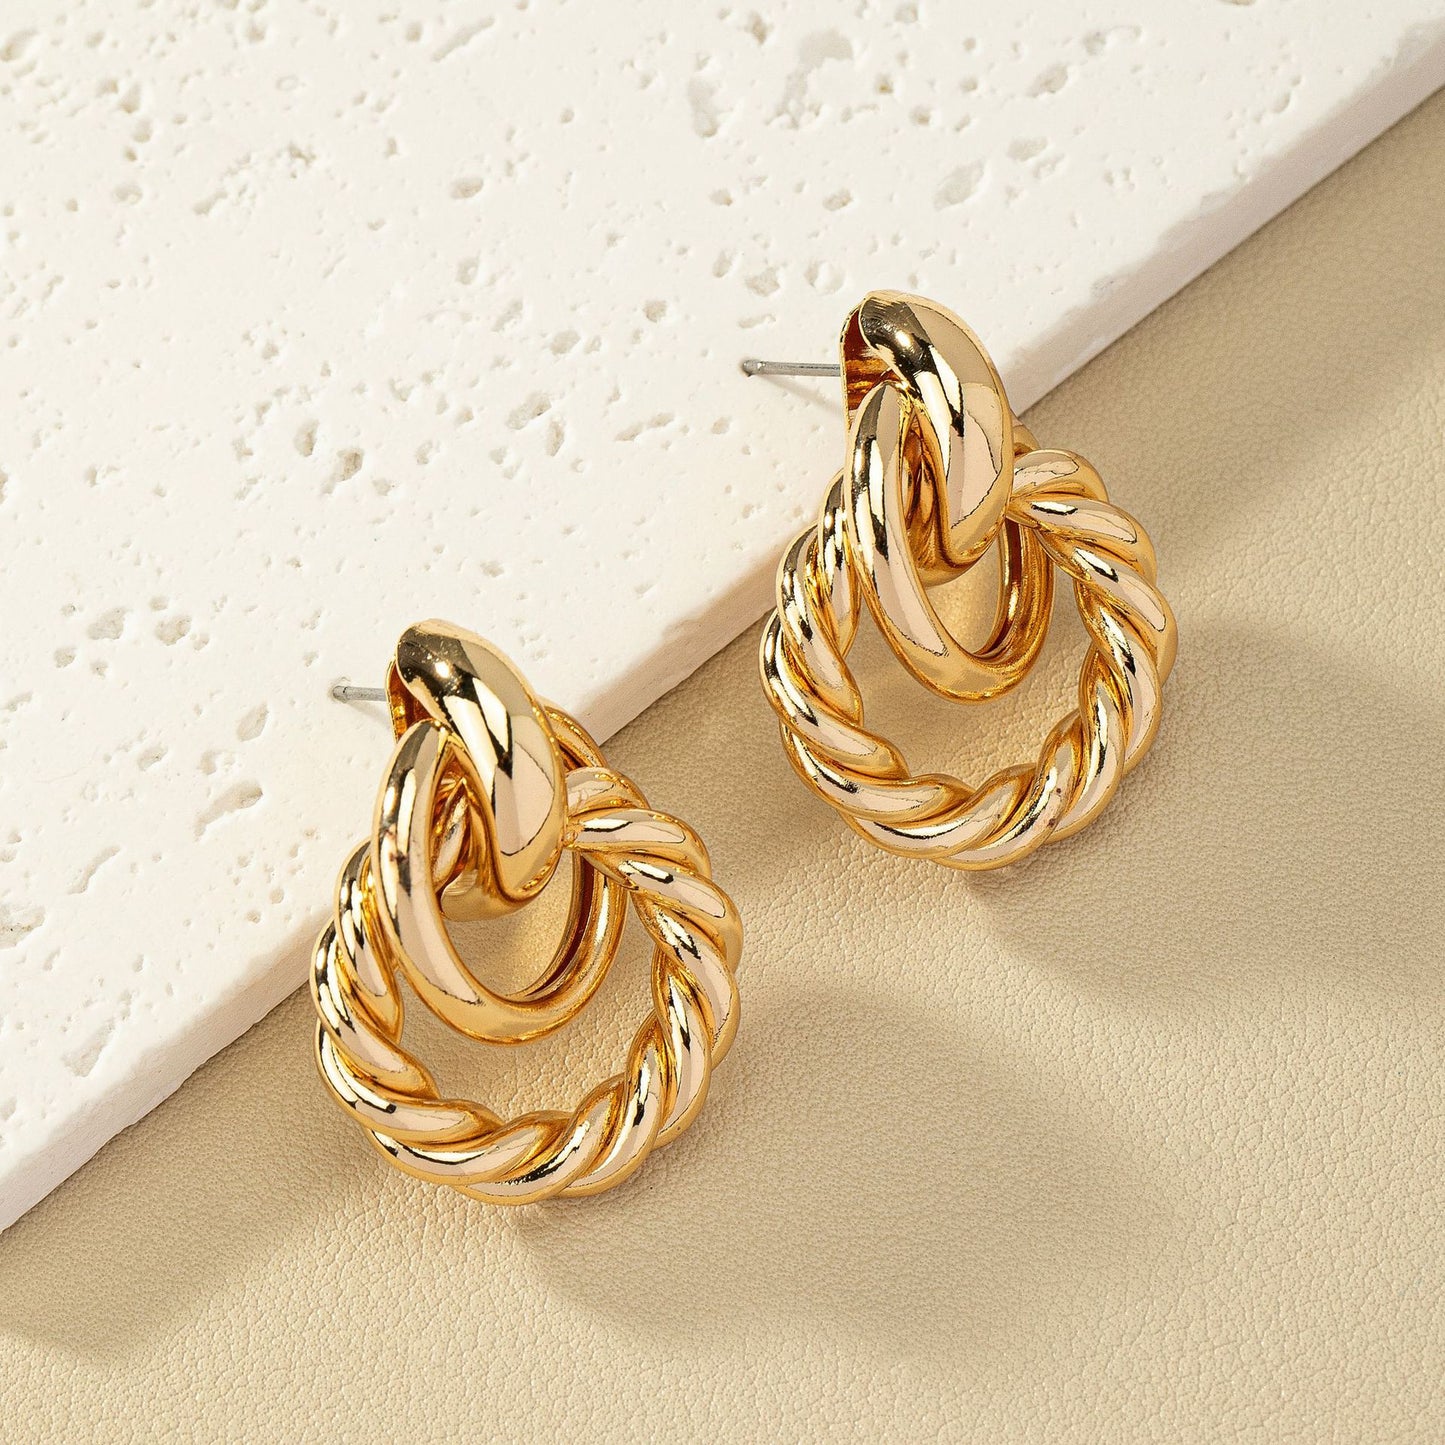 Chic Vienna Verve Metal Earrings with Unique Winding Design